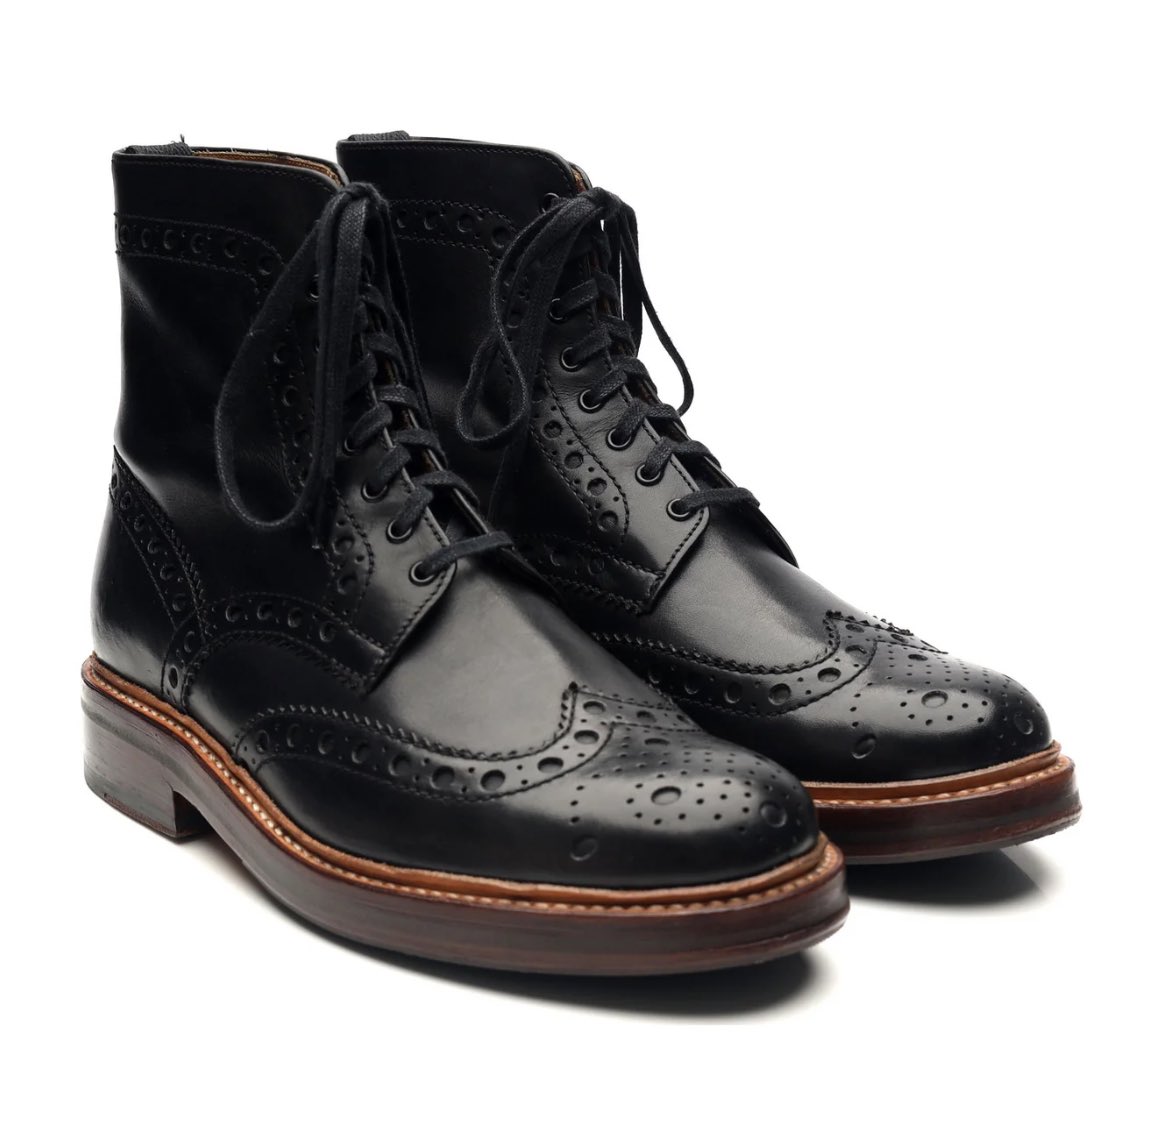 Edwin’s shoes might be the Grenson Fred' Black Leather Brogue Boots original retailing price £310